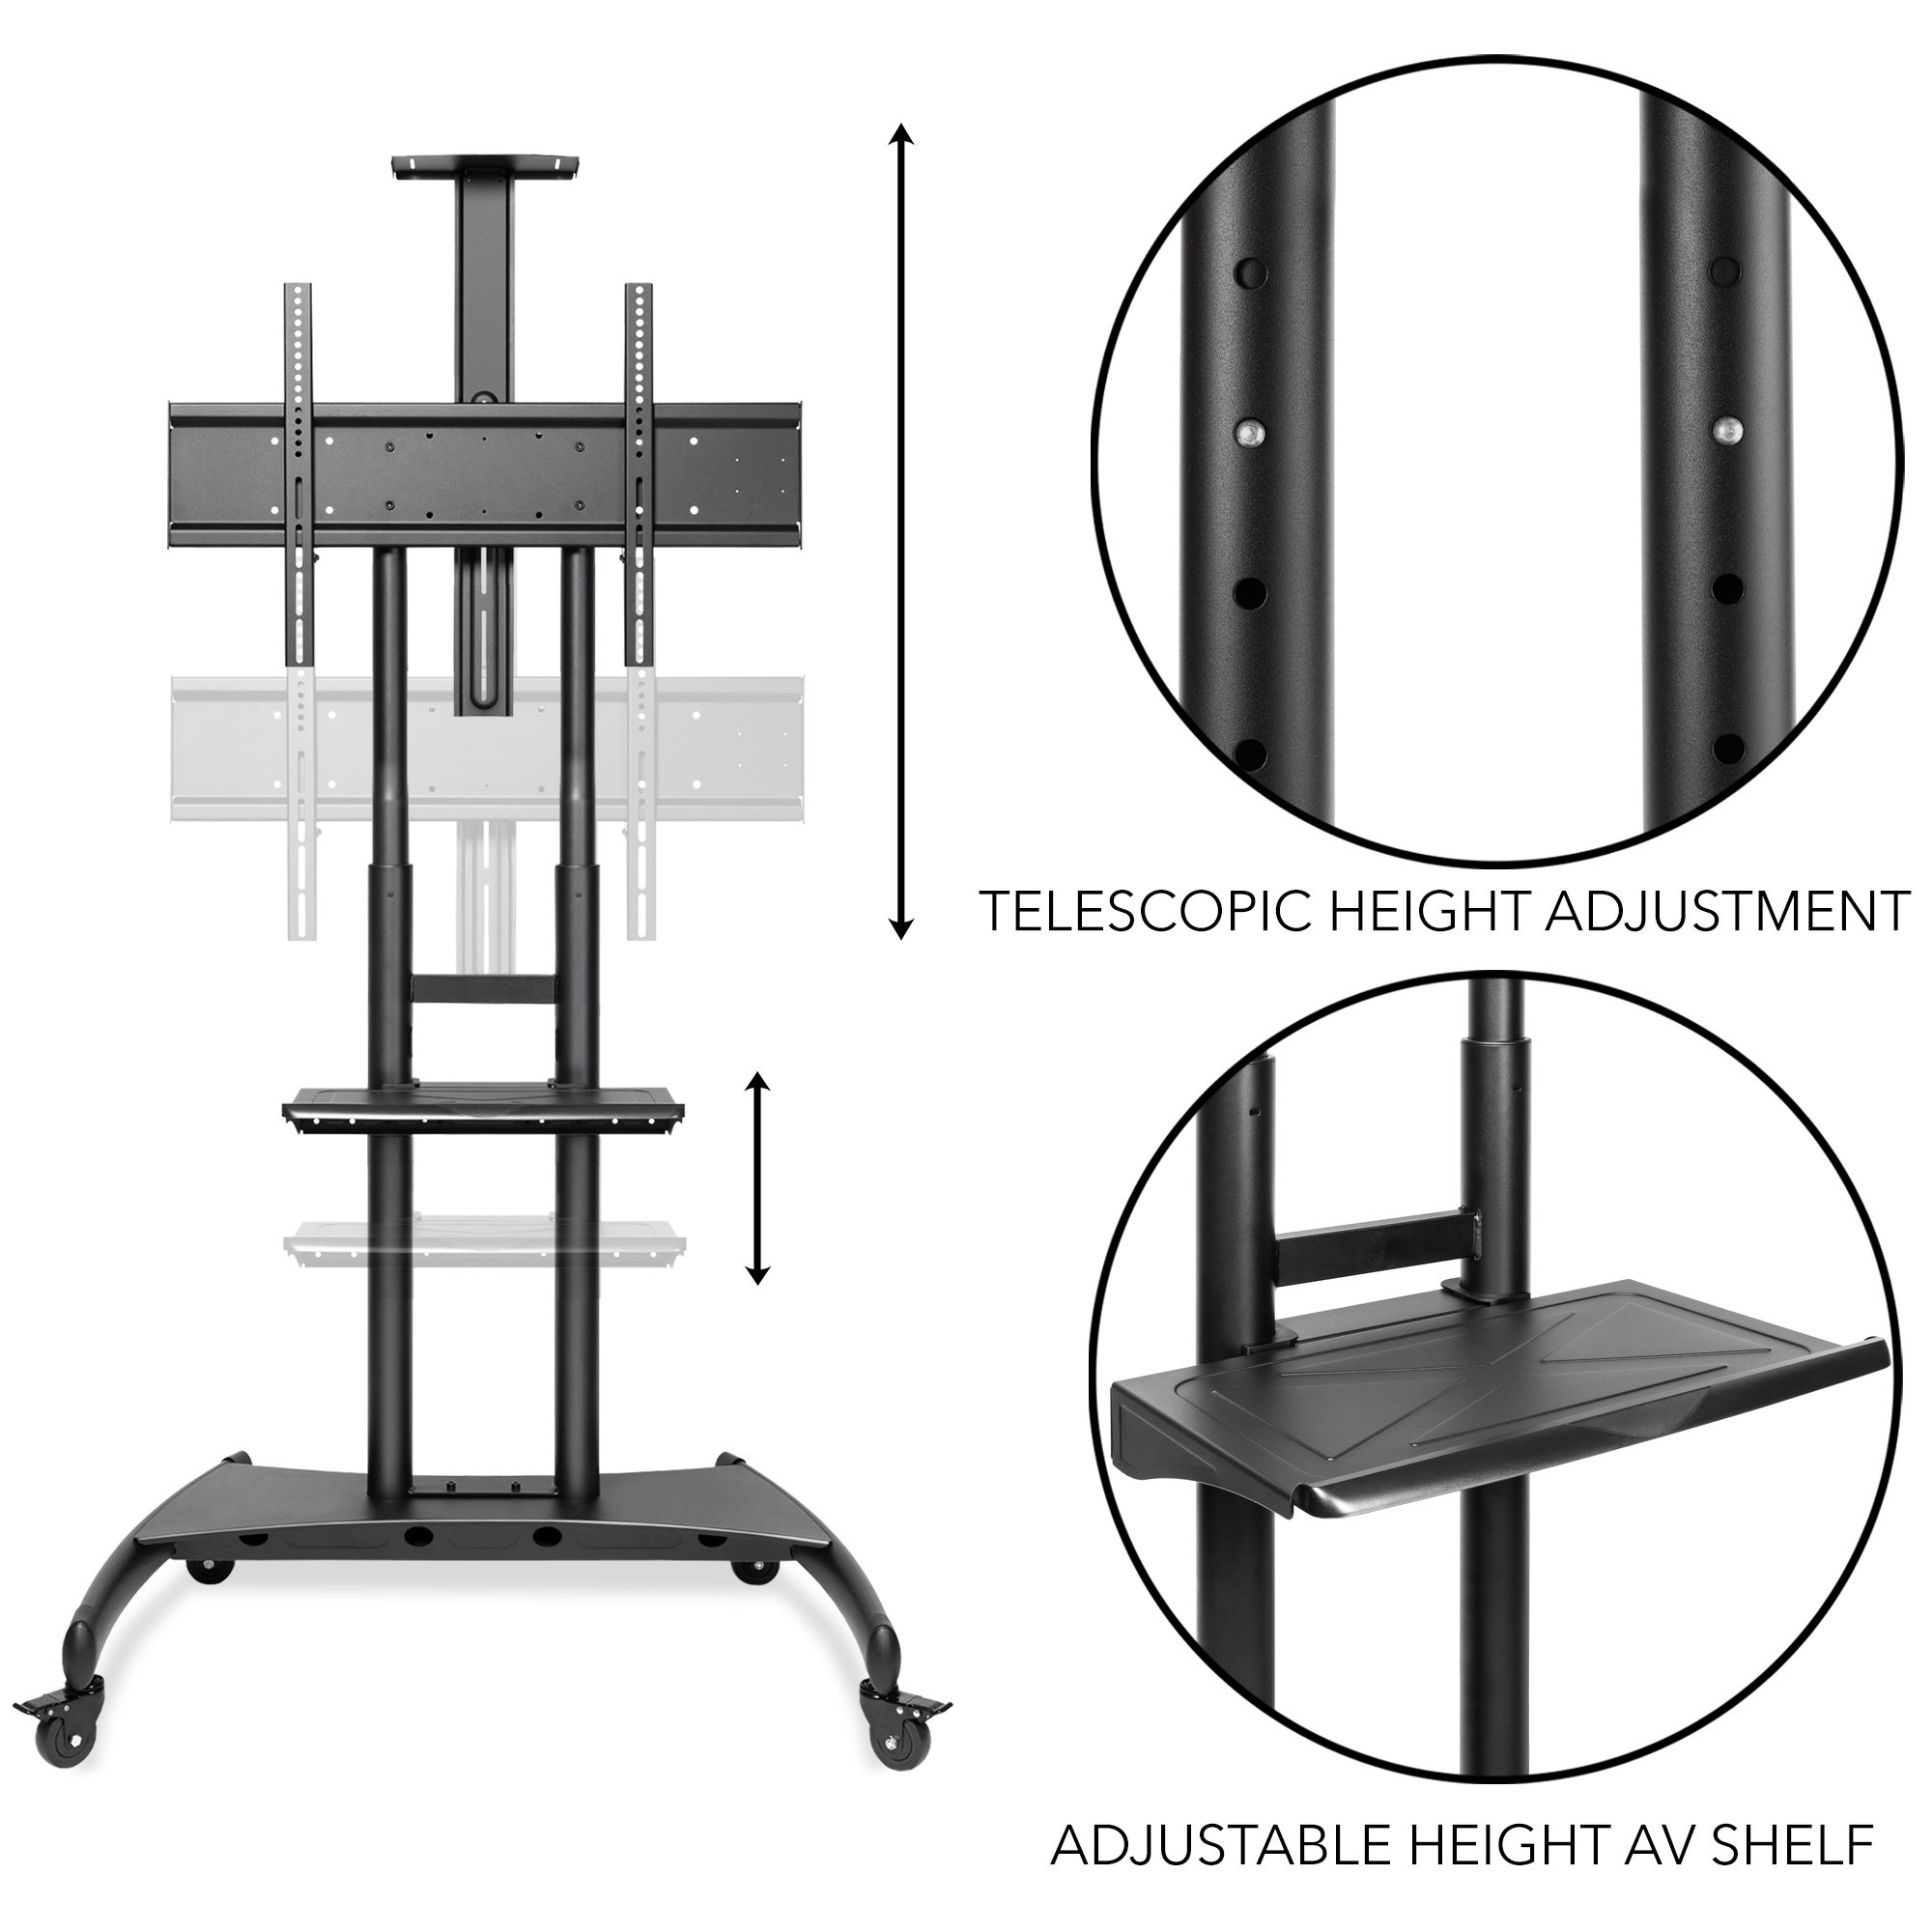 Mount Factory TV Stand Mobile Cart Mount Wheels for Flat Screen, LED, Plasma - fits 55" - 80"